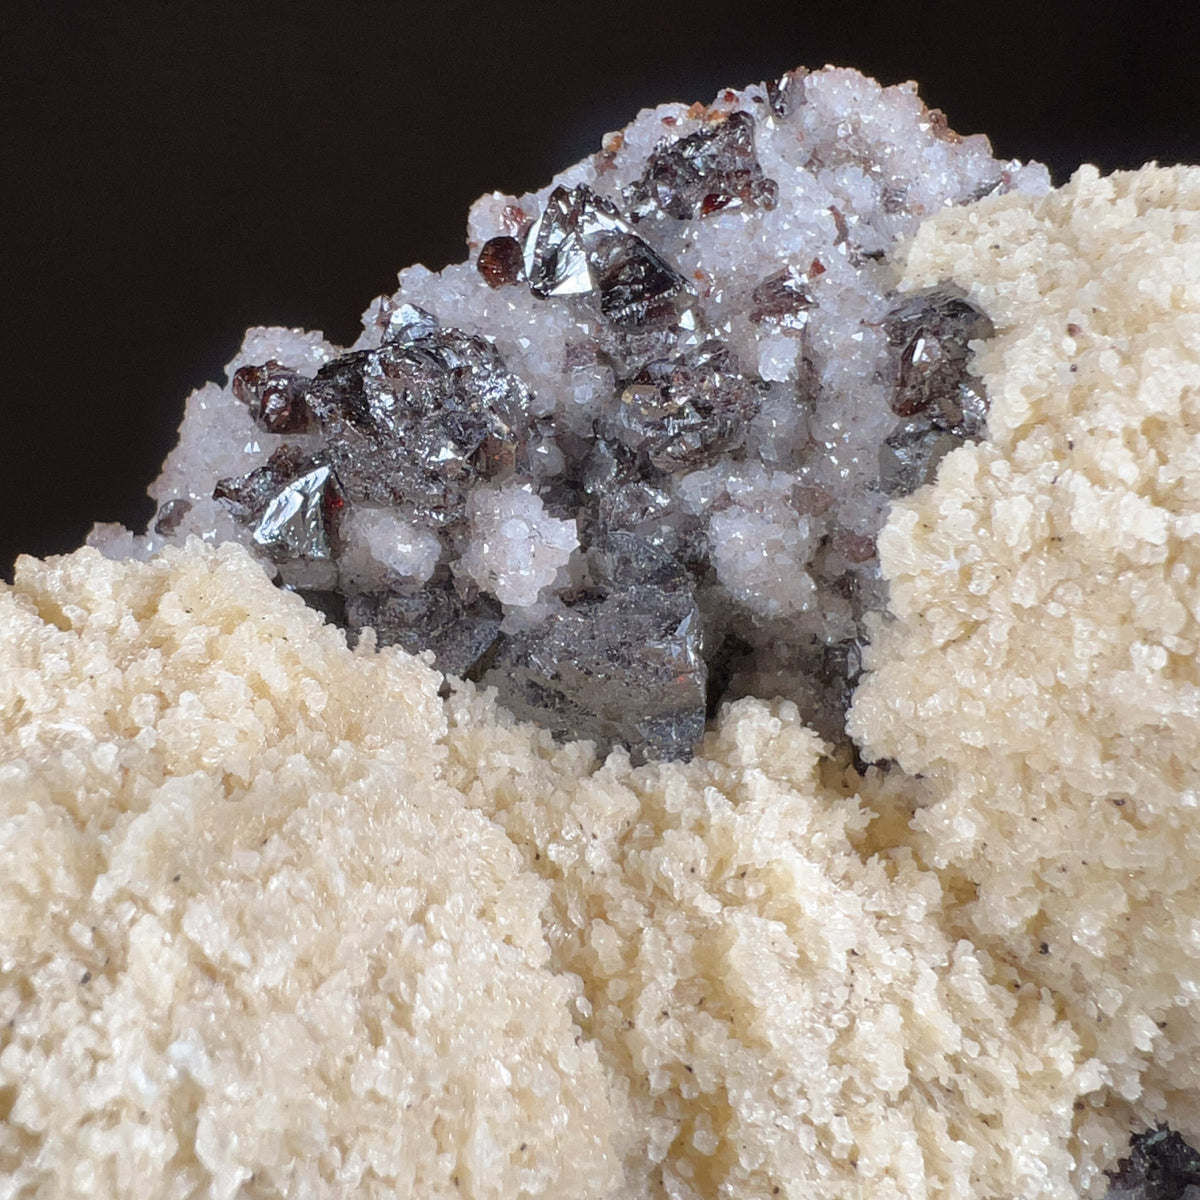 Close Up of Ruby Sphalerite Crystals with White Barite Balls and Drusy Quartz